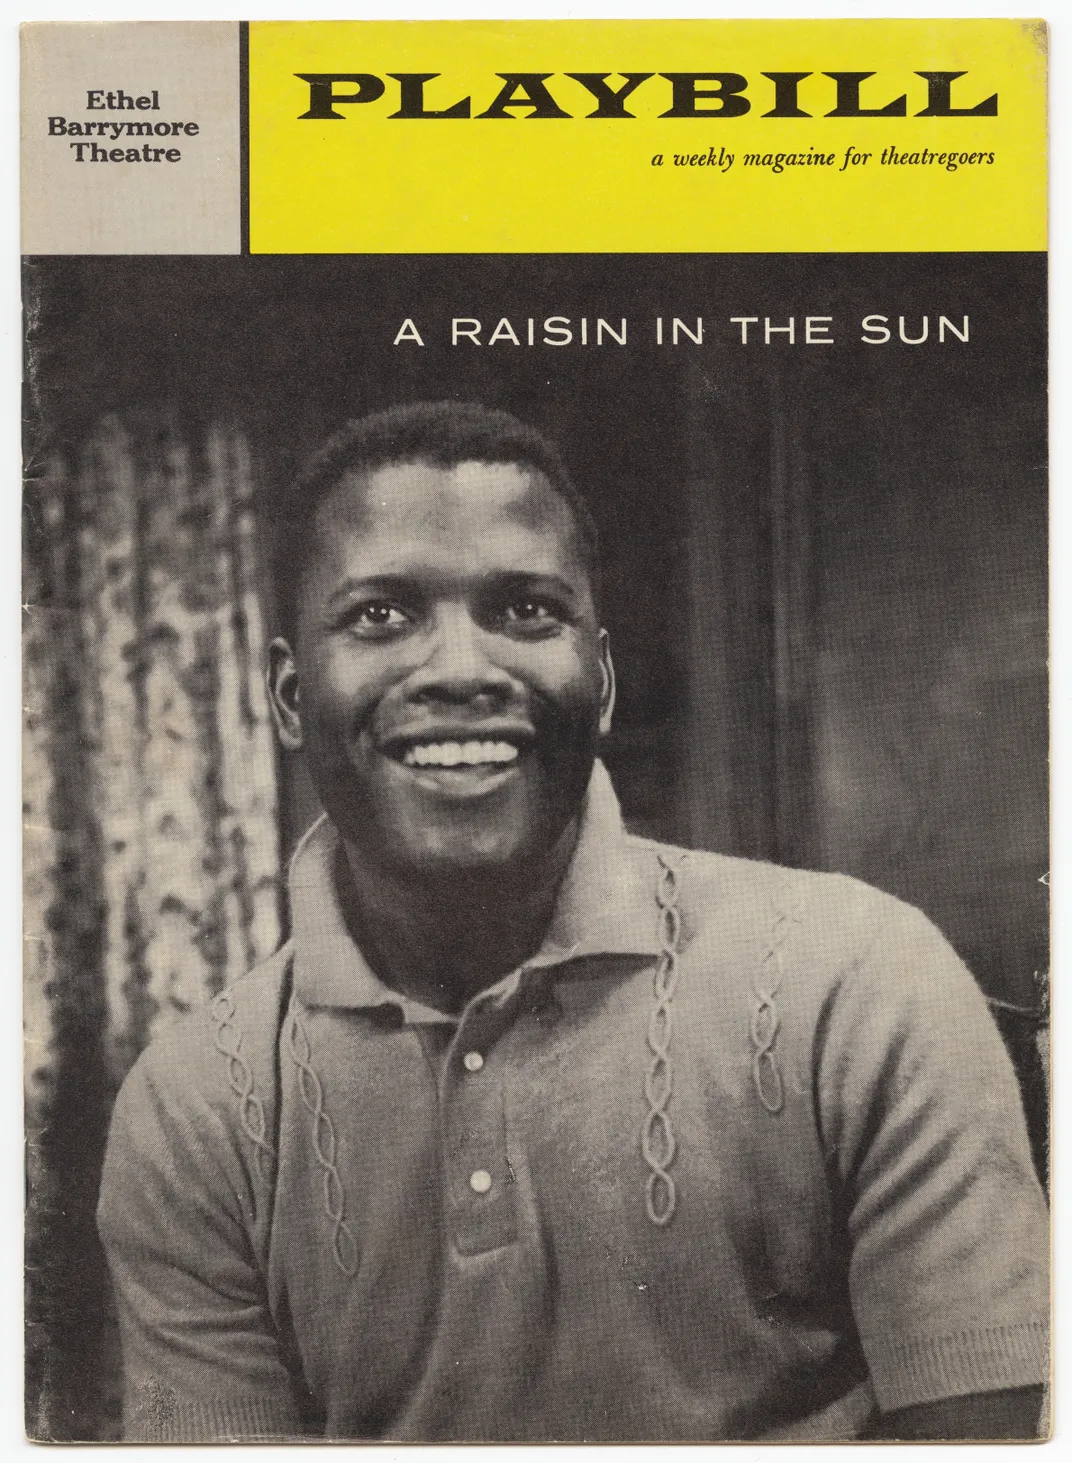 Playbill featuring a black and white headshot of a young Poitier, in a polo shirt smiling and looking up